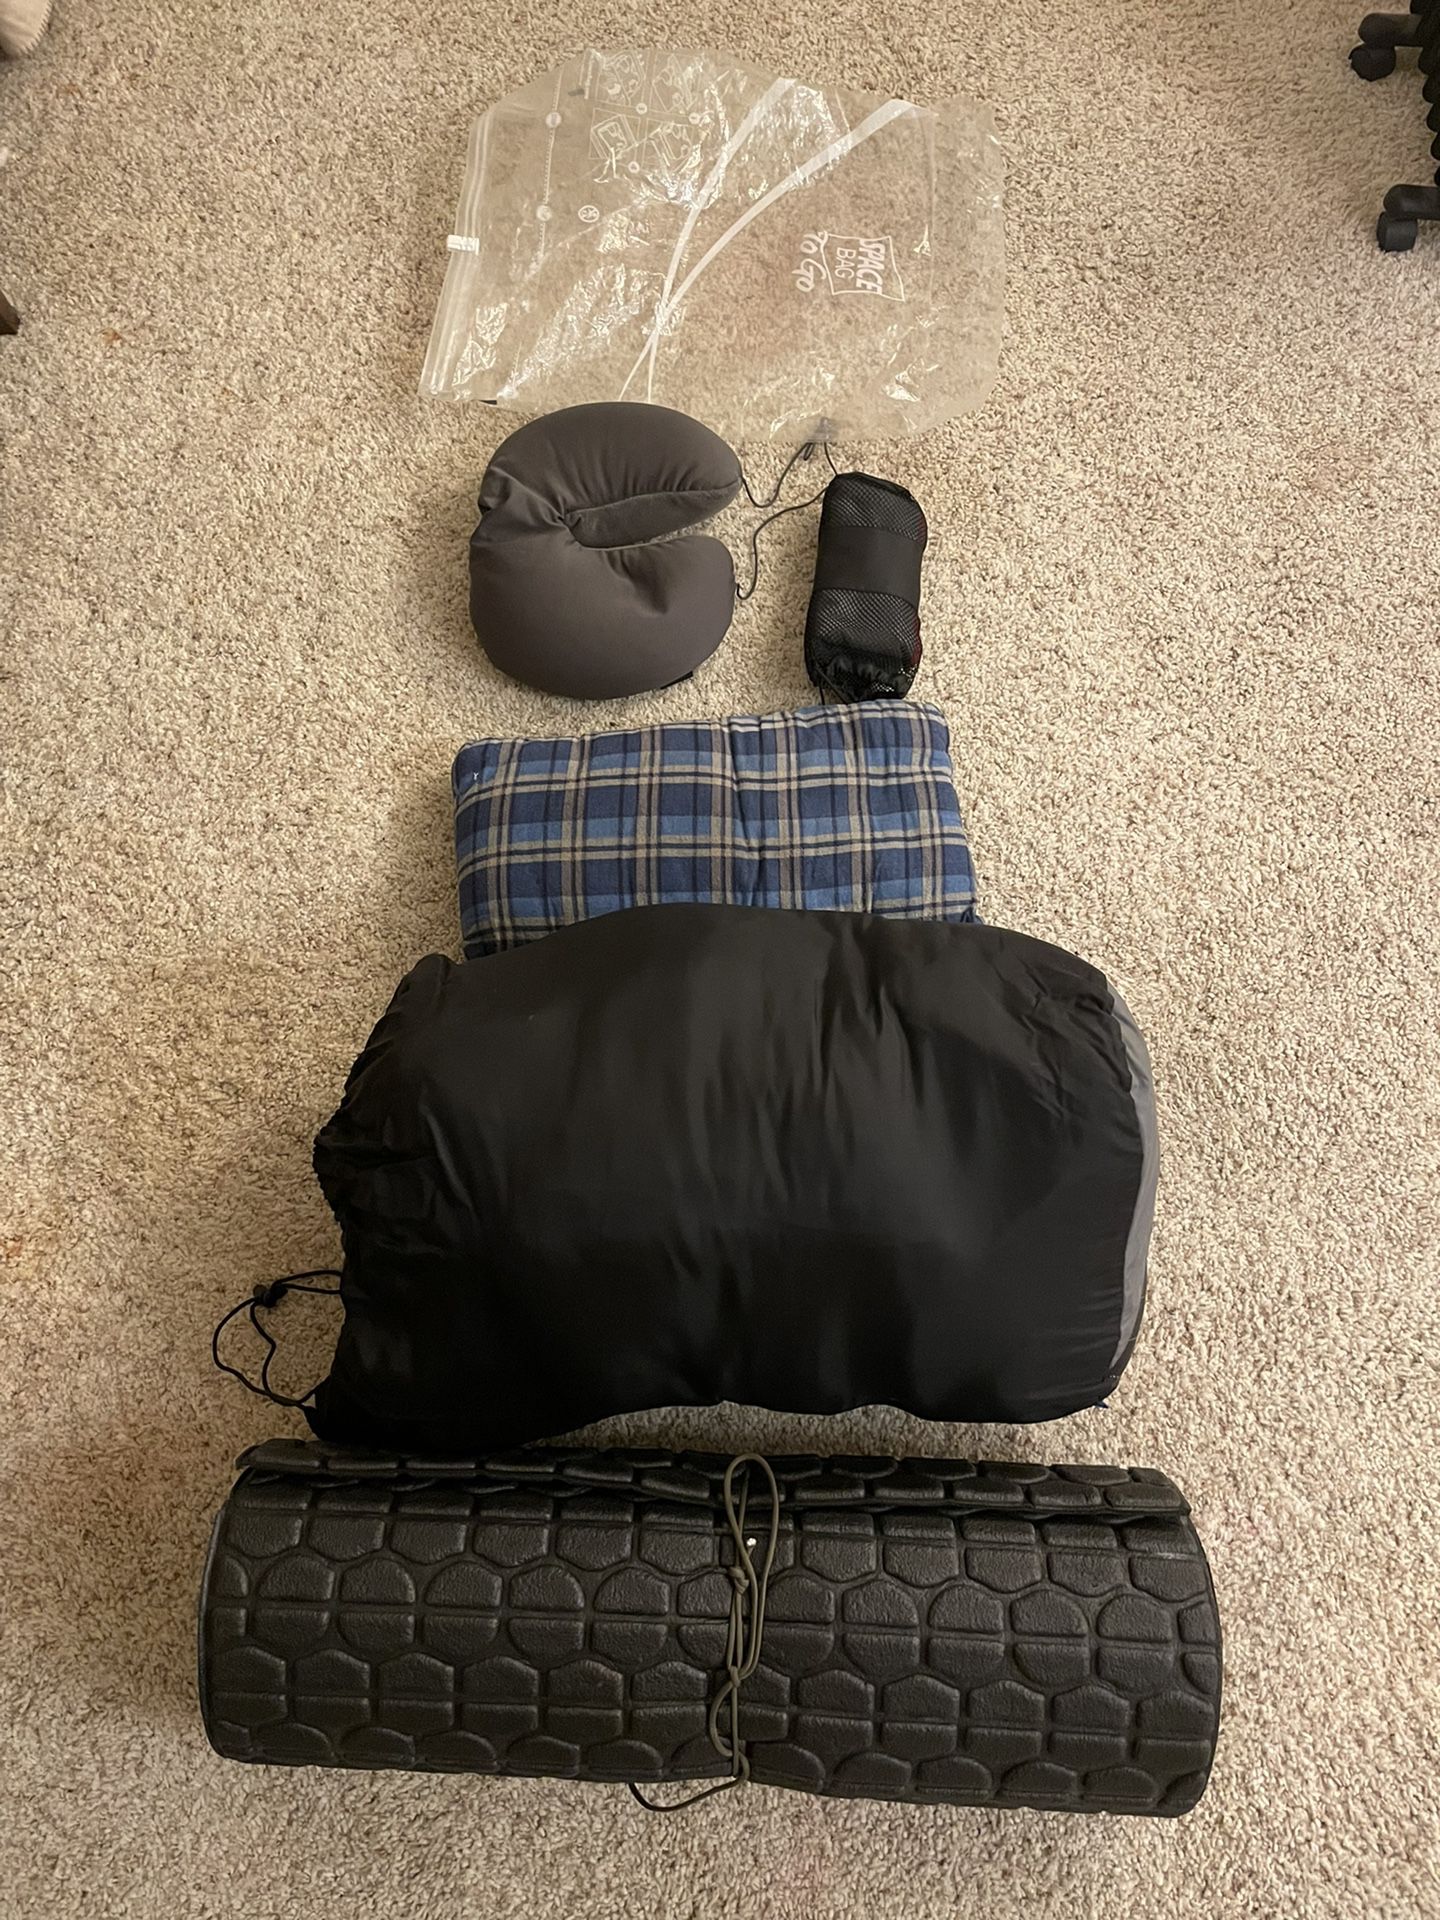 North Face Two Person Sleeping Bag - Like New